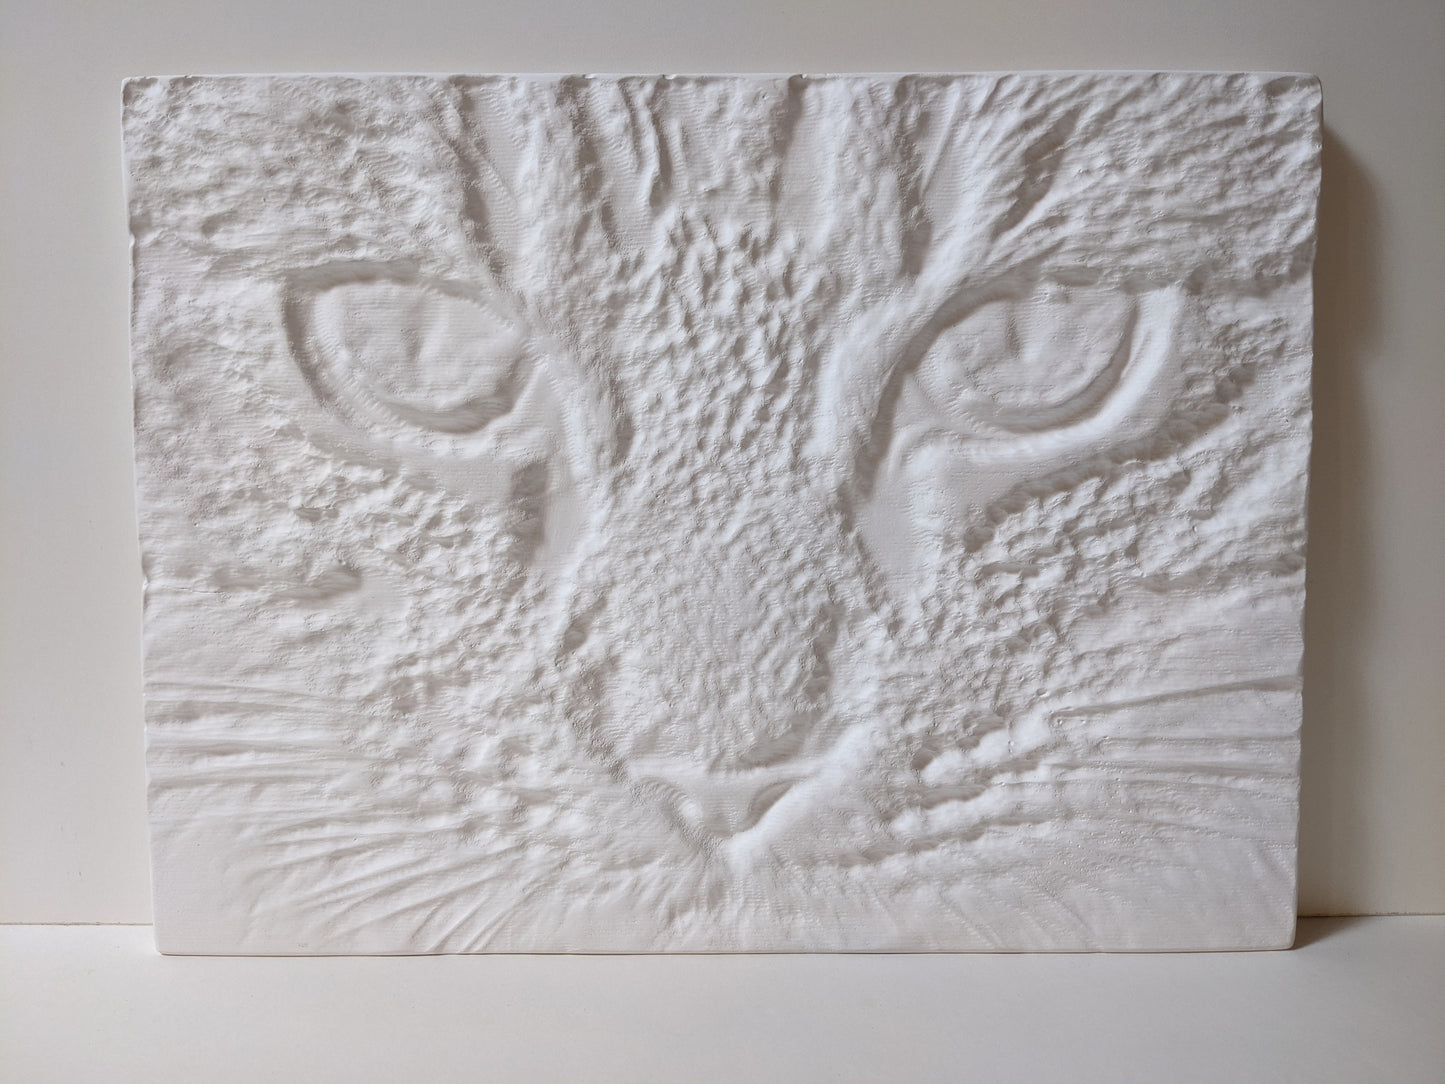 Kindred - Cat Face Bas Relief Sculpture